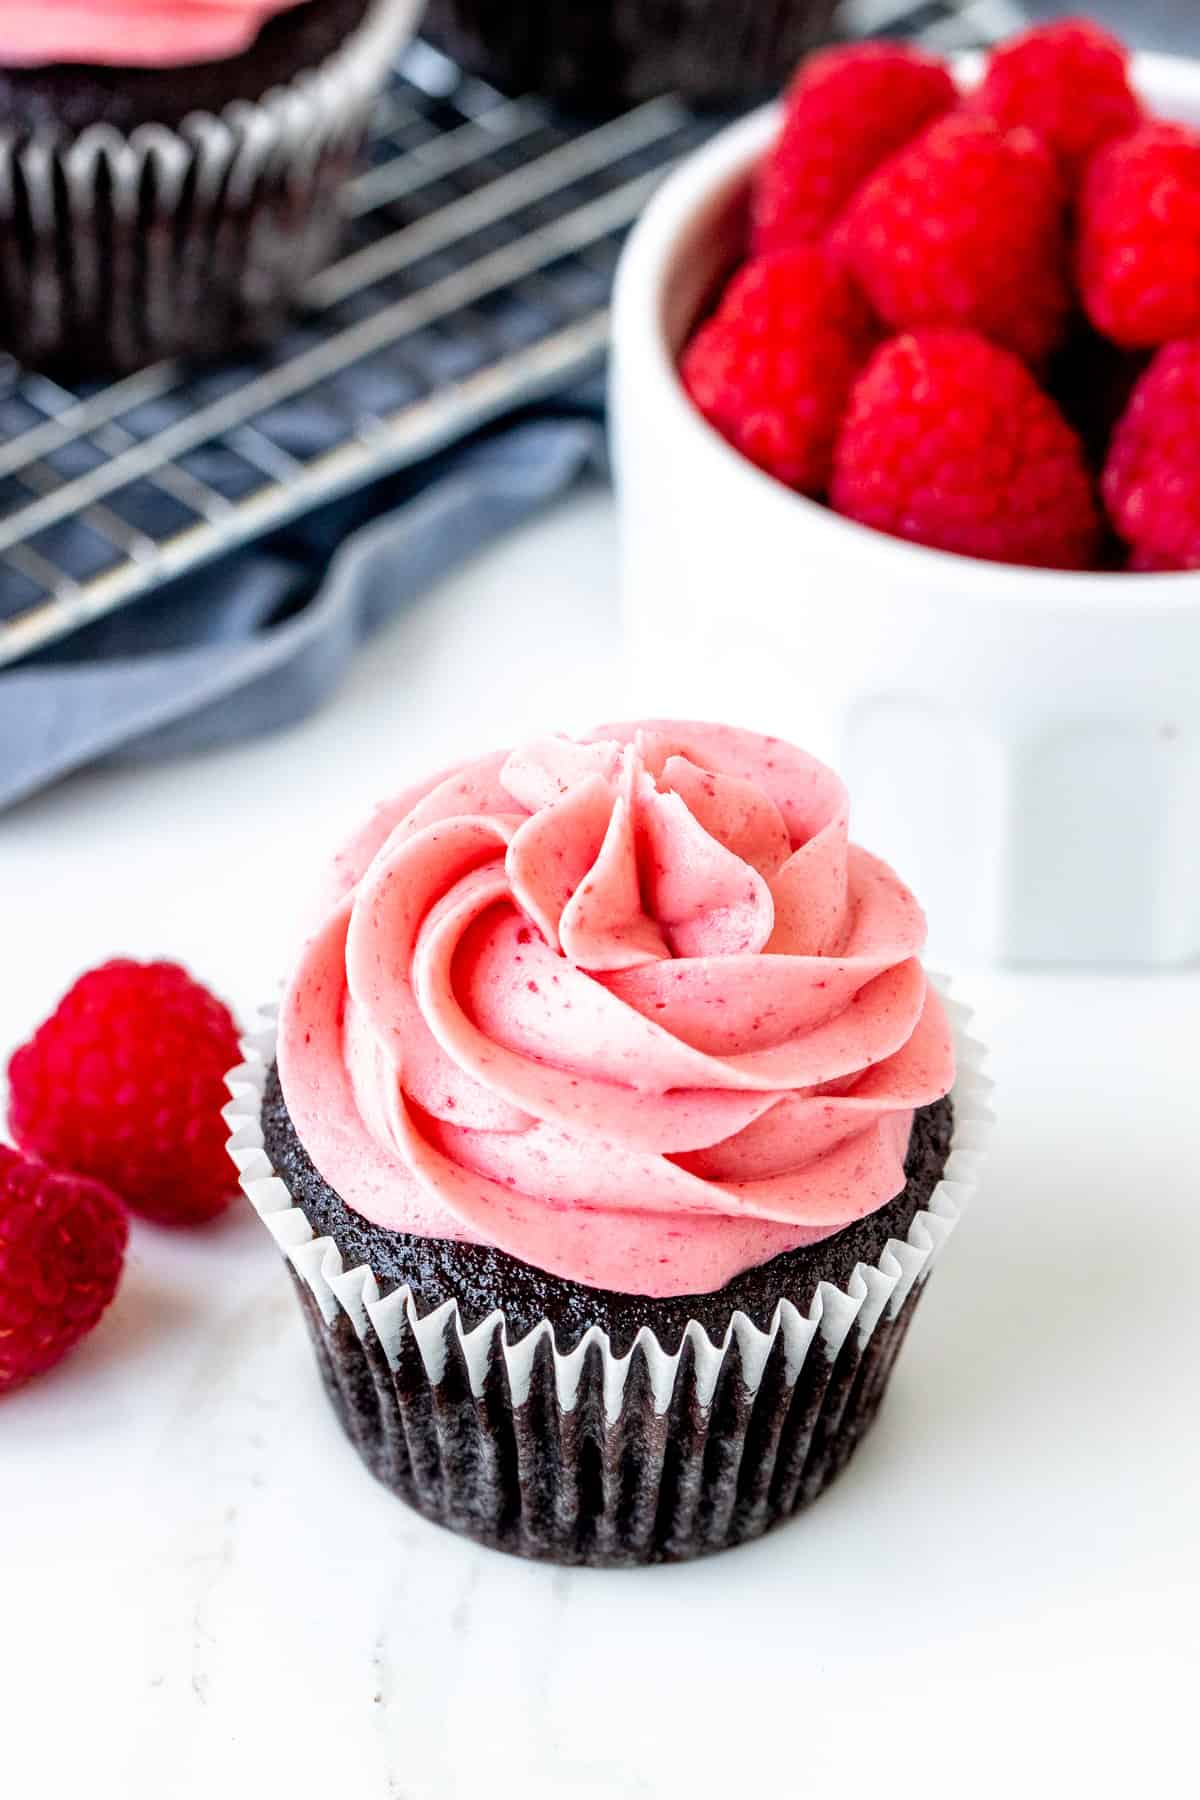 Chocolate raspberry cupcake with small bowl of berries